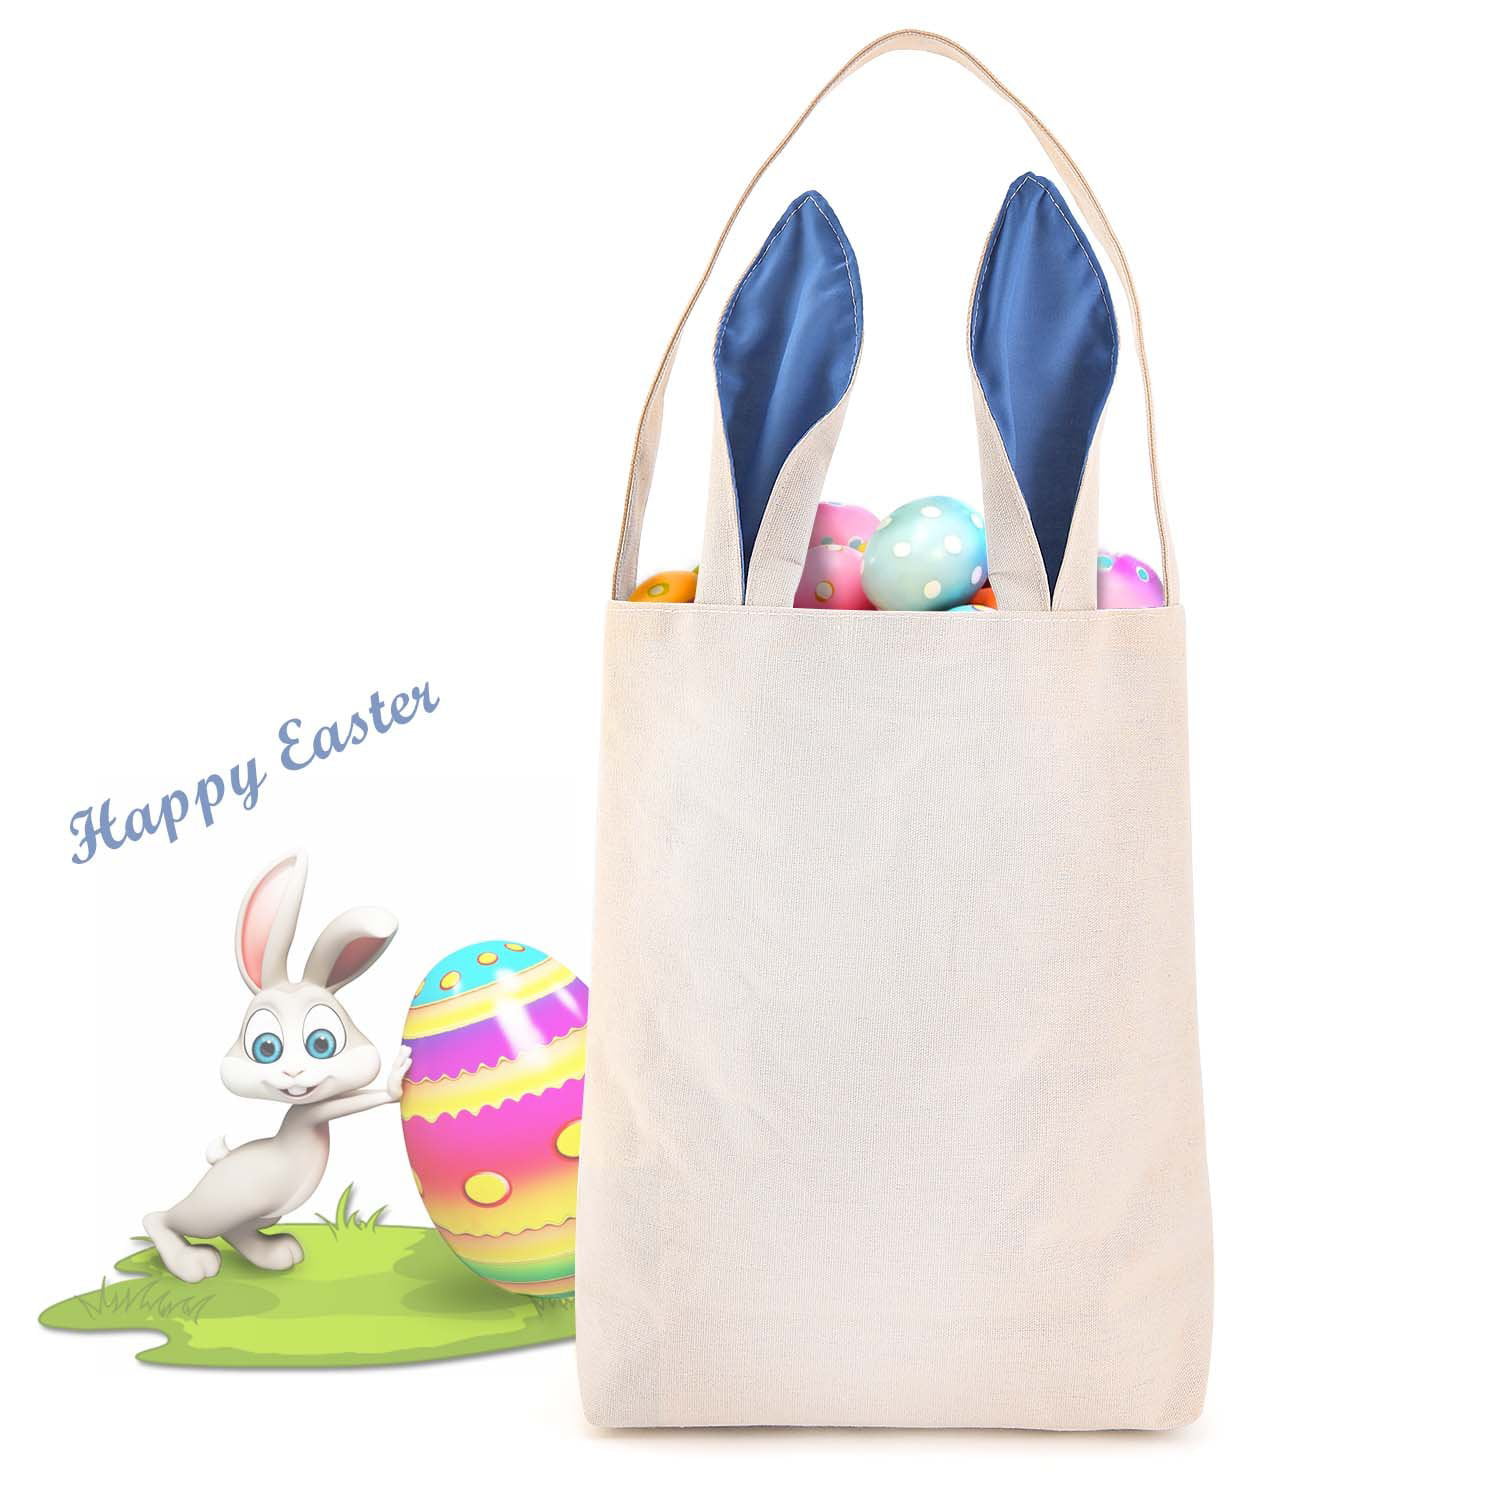 Easter Bunny Bag - Easter Basket Tote Handbag for Egg Hunts with Dual Layer  Bunny Ears Design, Excellent for Carrying Eggs, Candies, Gifts at Easter  Party - Walmart.com